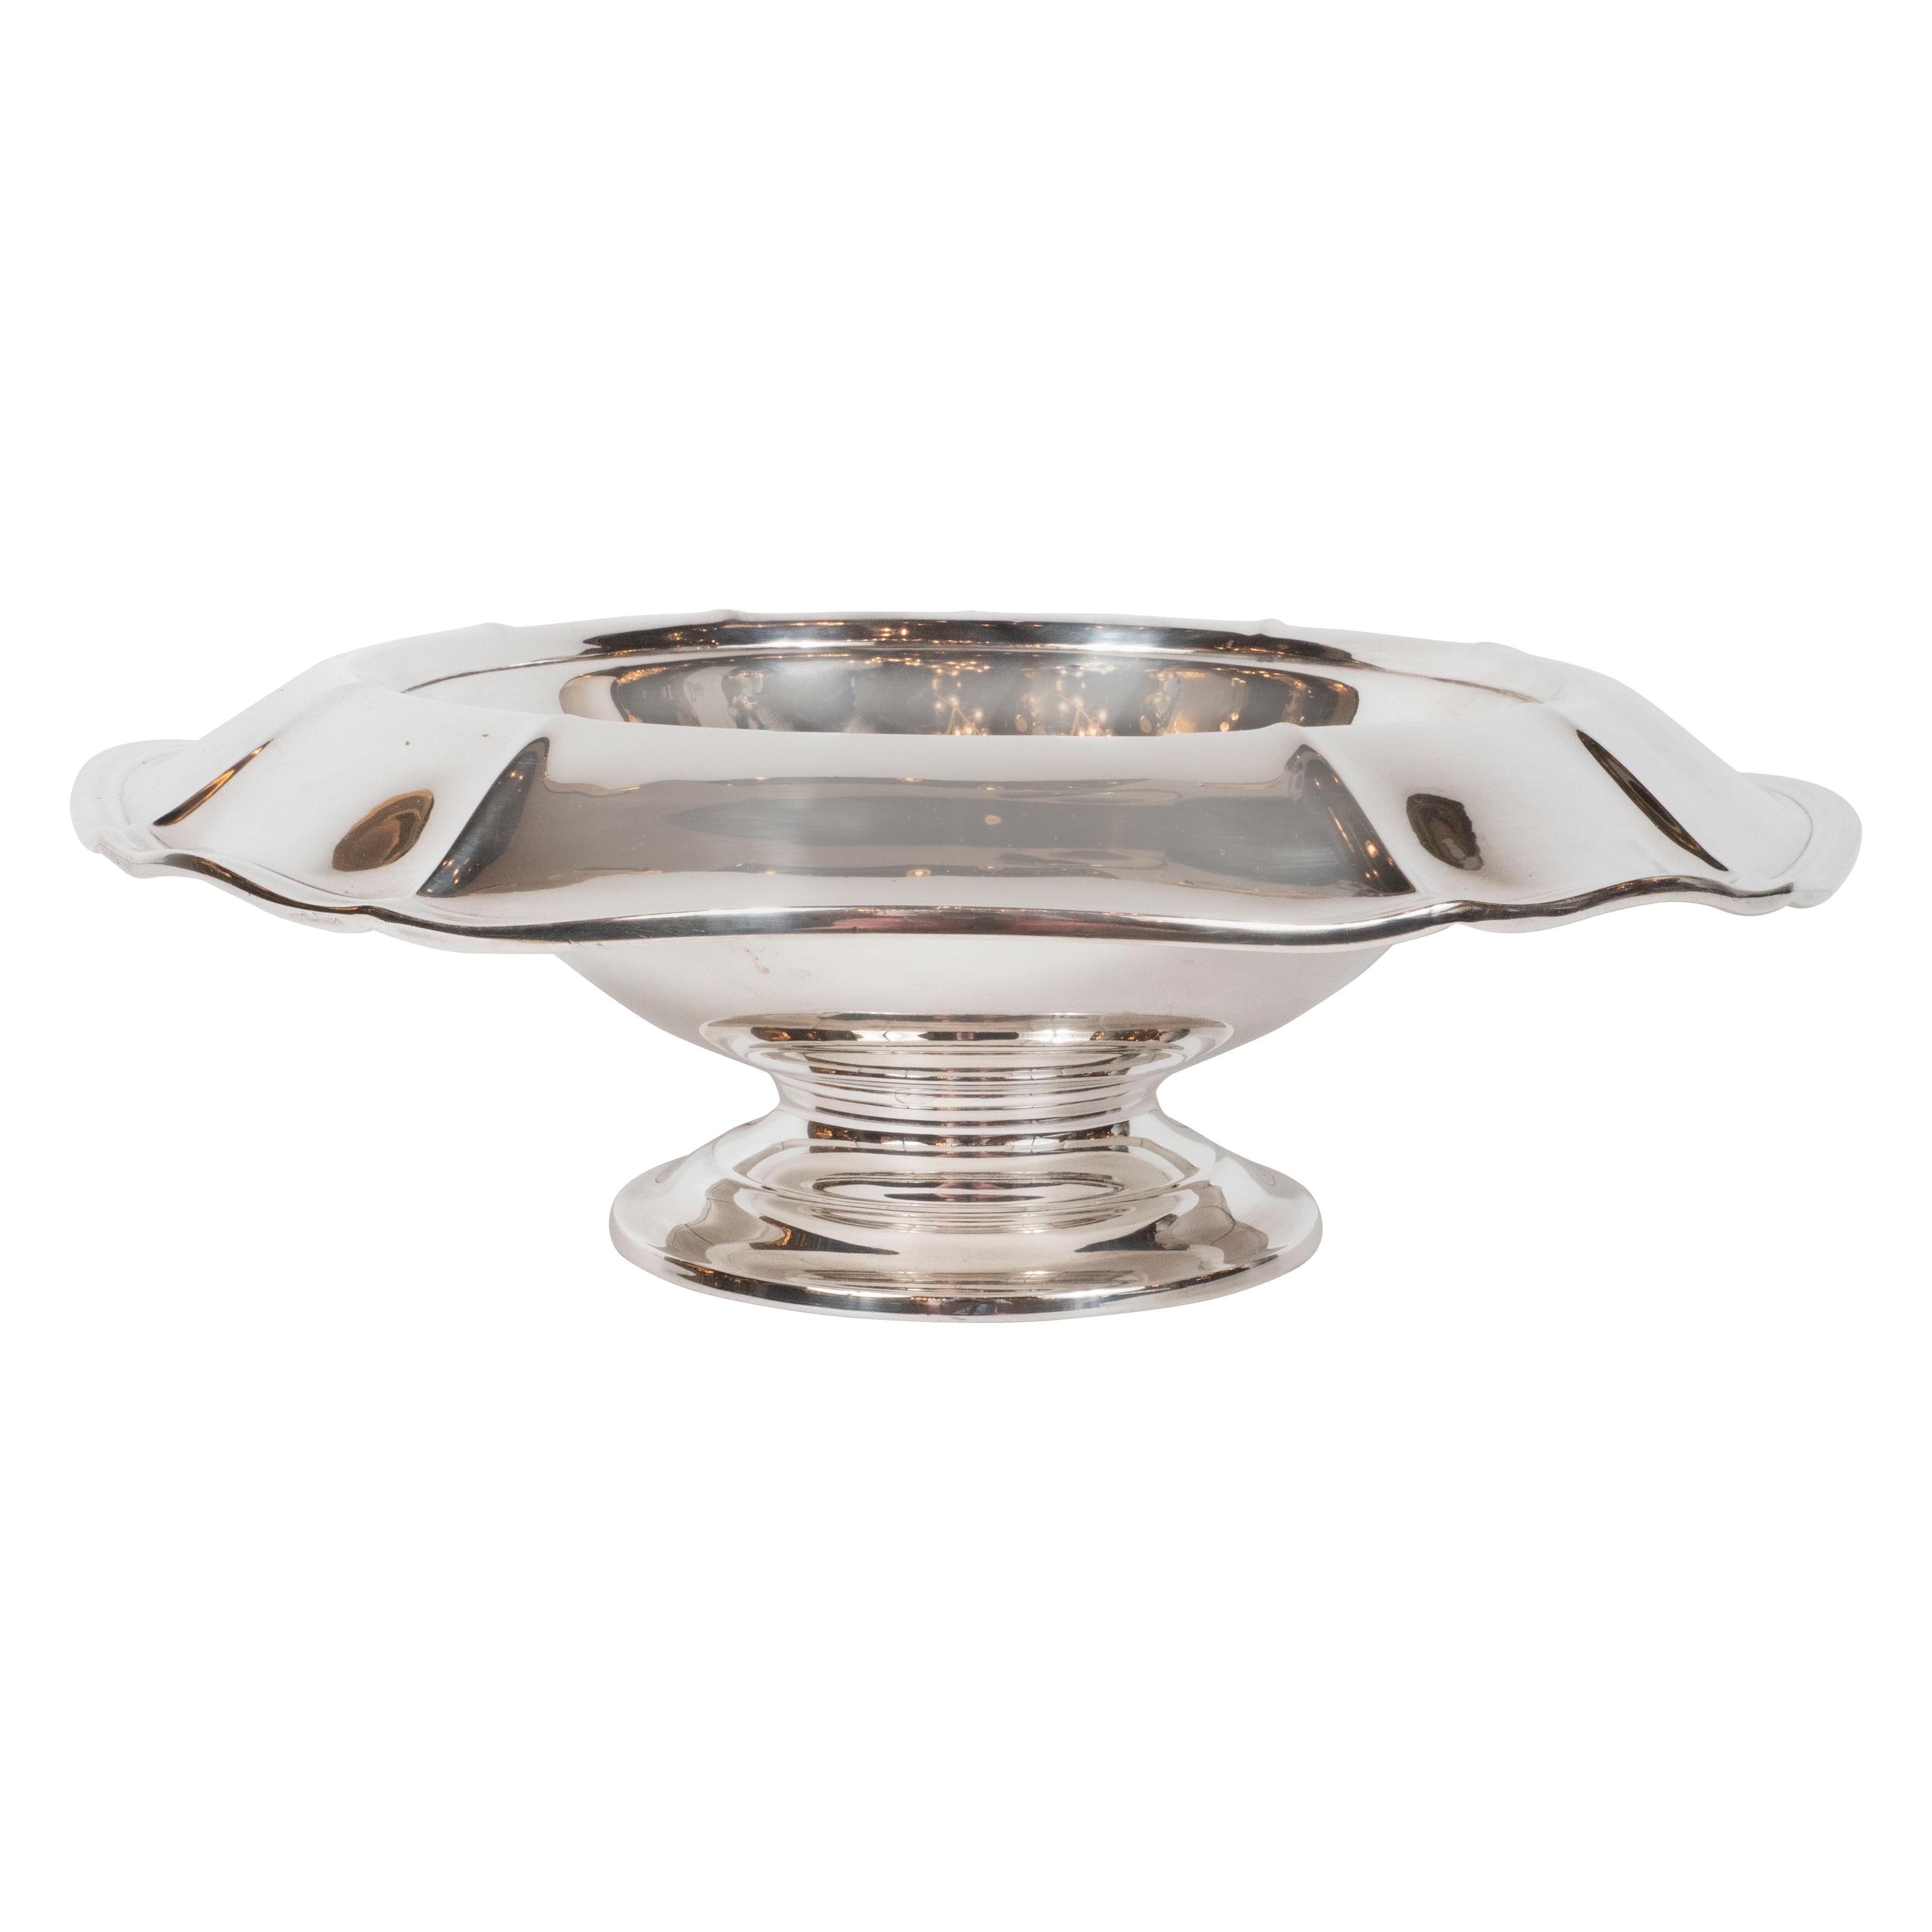 This elegant Mid-Century Modern centerpiece bowl was realized in the United States, circa 1950. It features undulating sides; a stepped base and a recessed center all realized in lustrous sterling silver. With its sculptural profile and clean